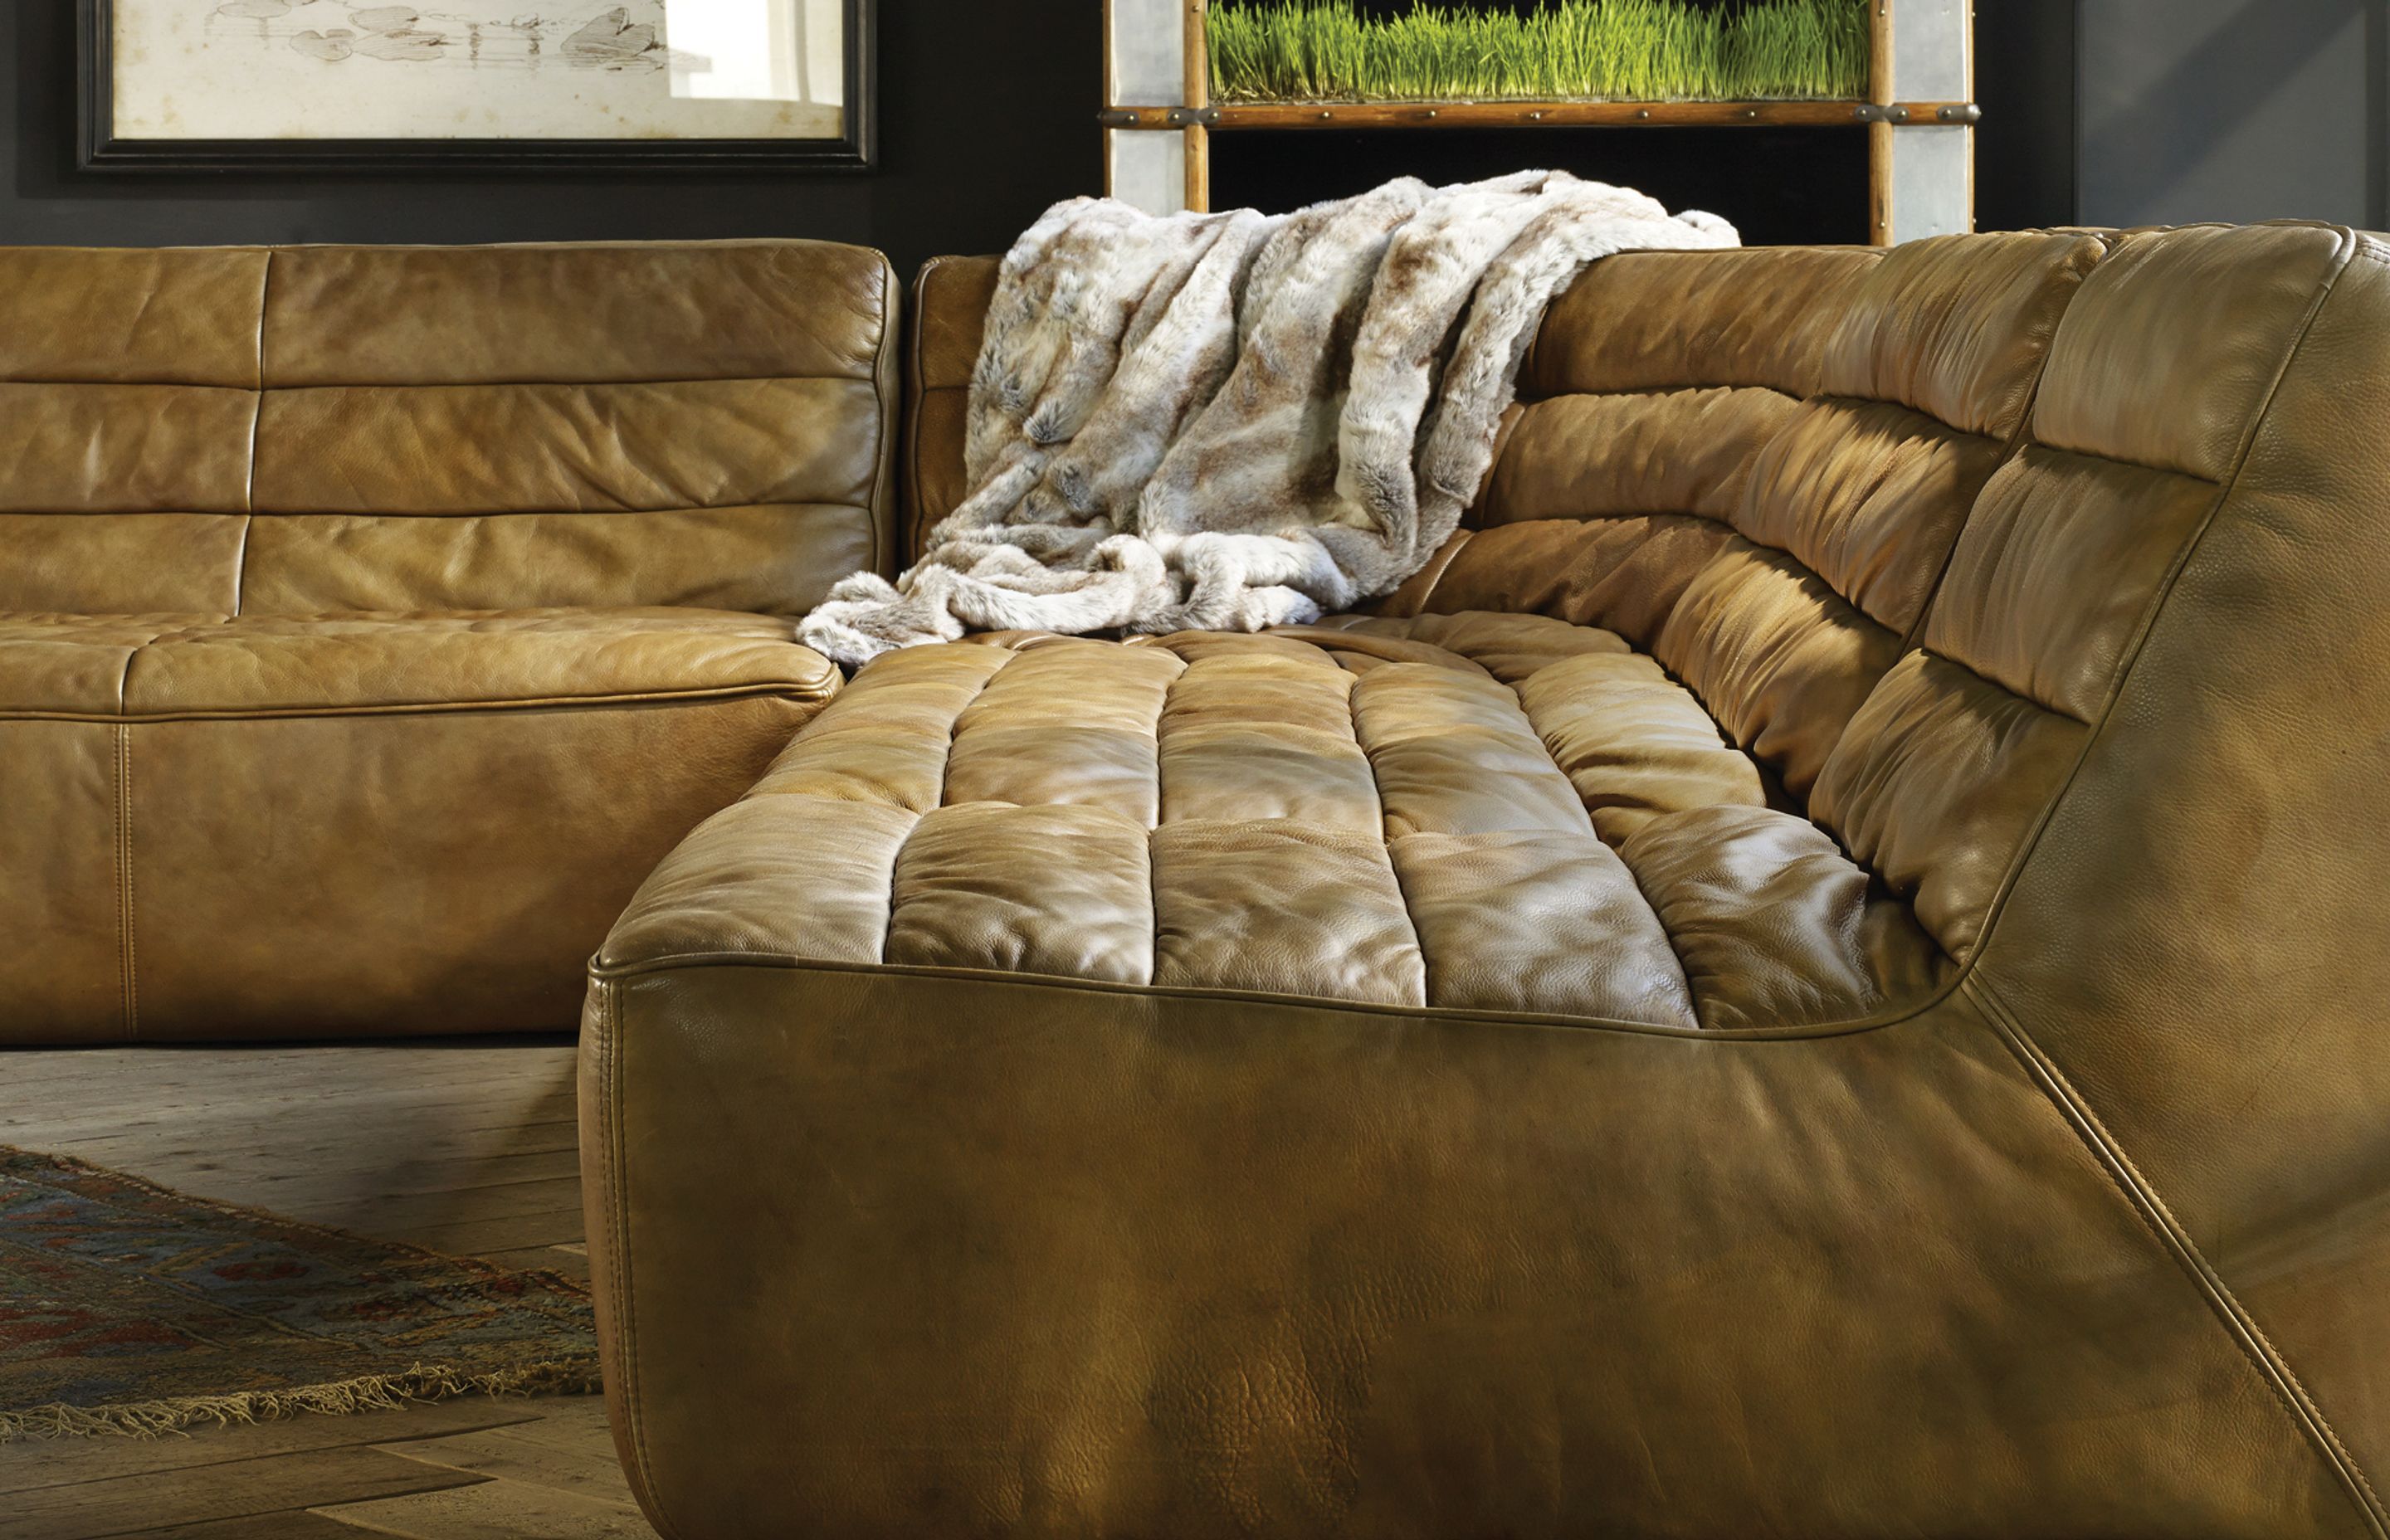 The Shabby is high impact comfort seating, commonly known as Timothy Oulton’s true ‘sloucher’.